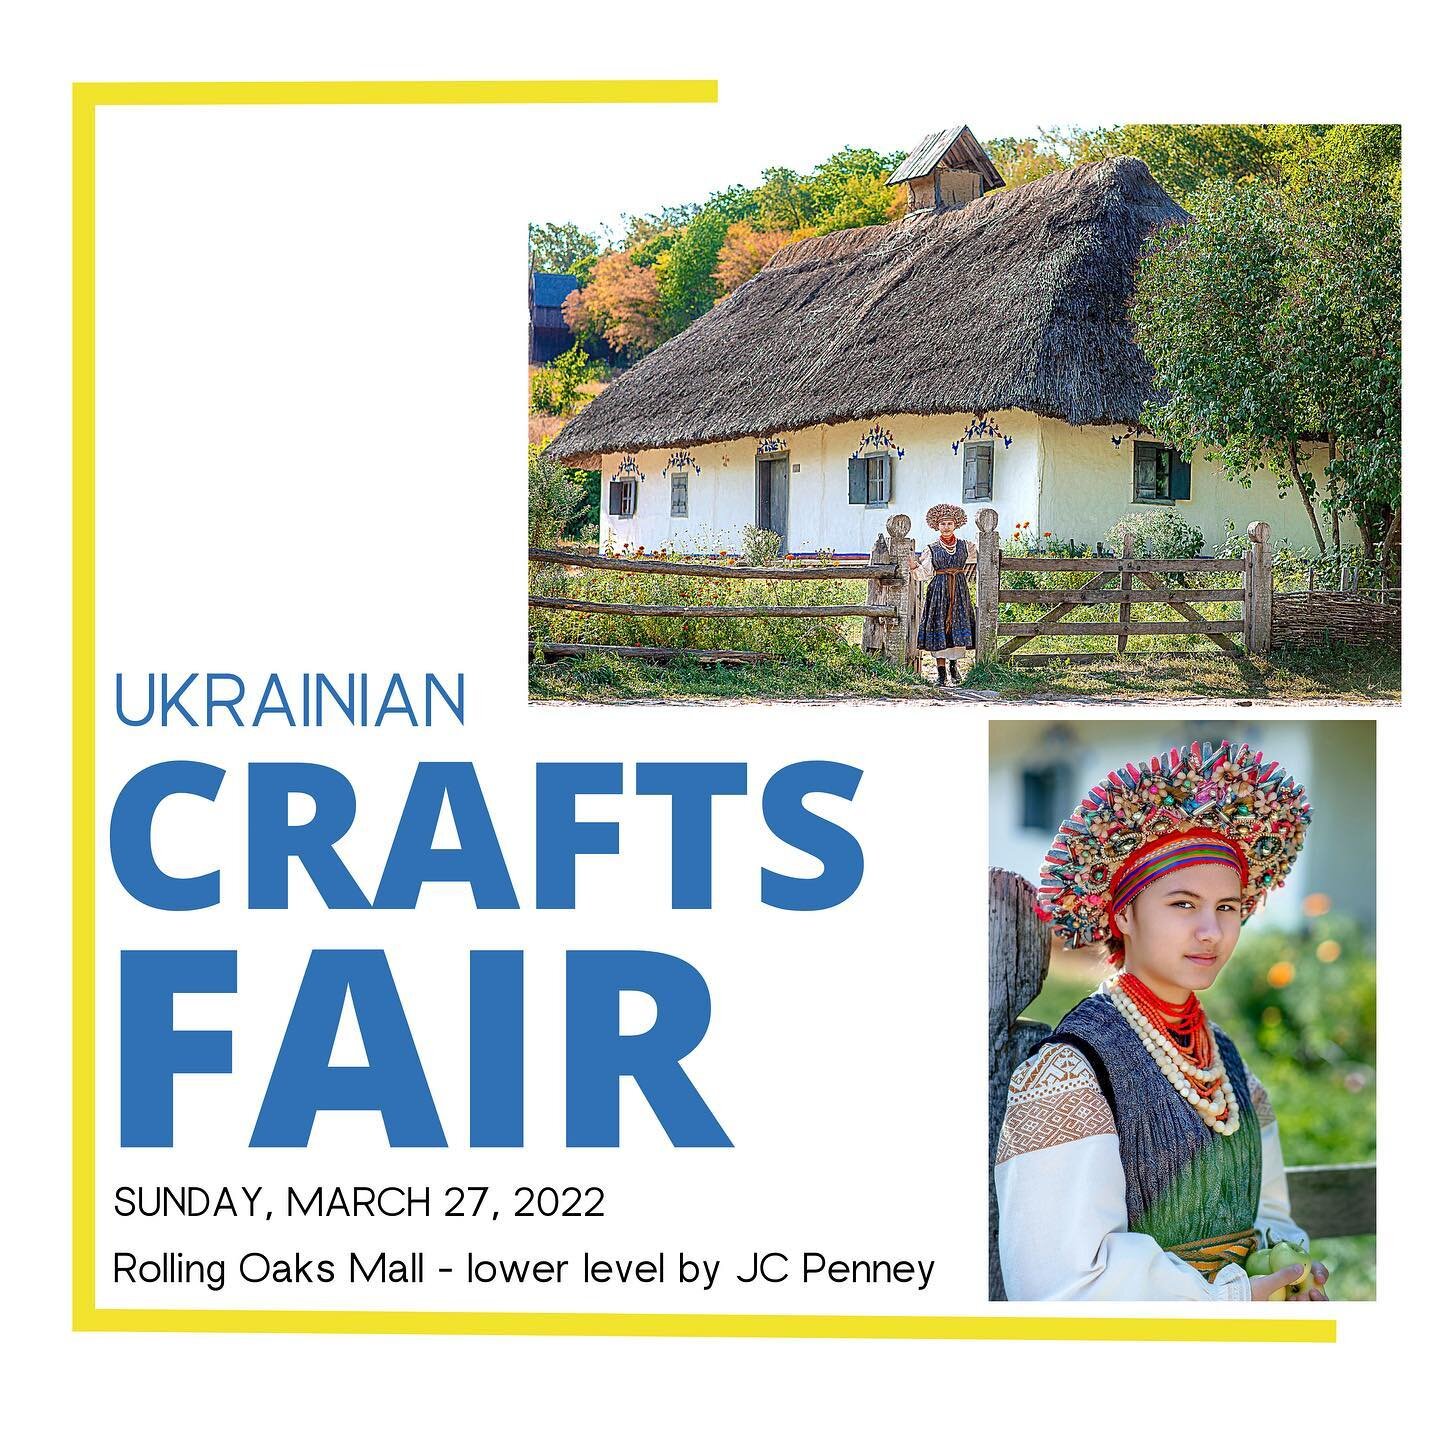 UKRAINIAN CRAFTS FAIR 
Sunday, March 27, 2022
11:30am - 5:00pm

ROLLING OAKS MALL
Lower level by the JCPenney's entrance.
6909 N. Loop 1604 E., San Antonio, TX 78247

Please join us for this fundraising
event. We will have Ukrainian arts
and crafts f